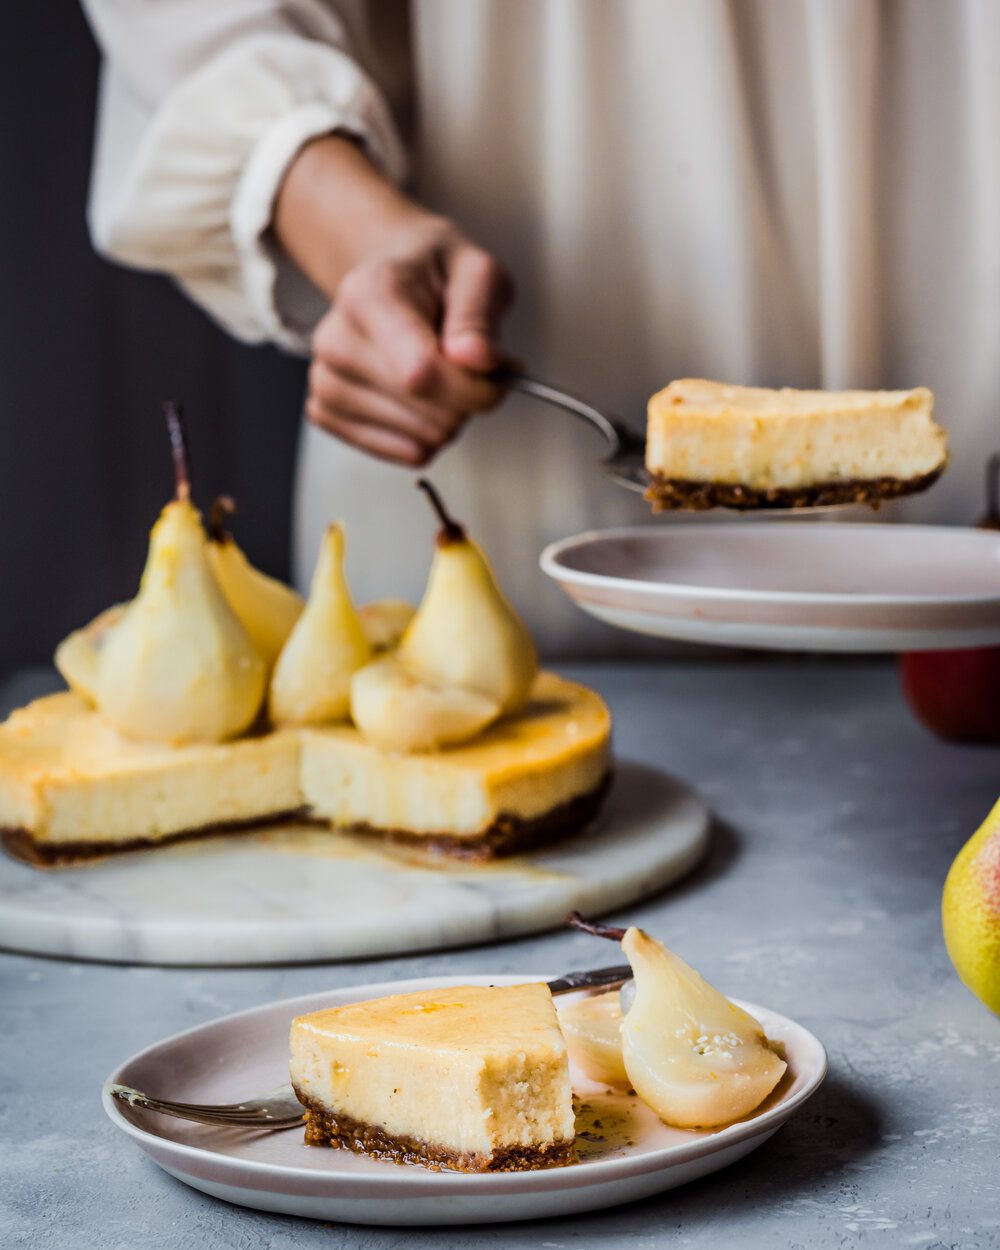 Ginger-Orange Baked Vegan Cheesecake with Poached Pears